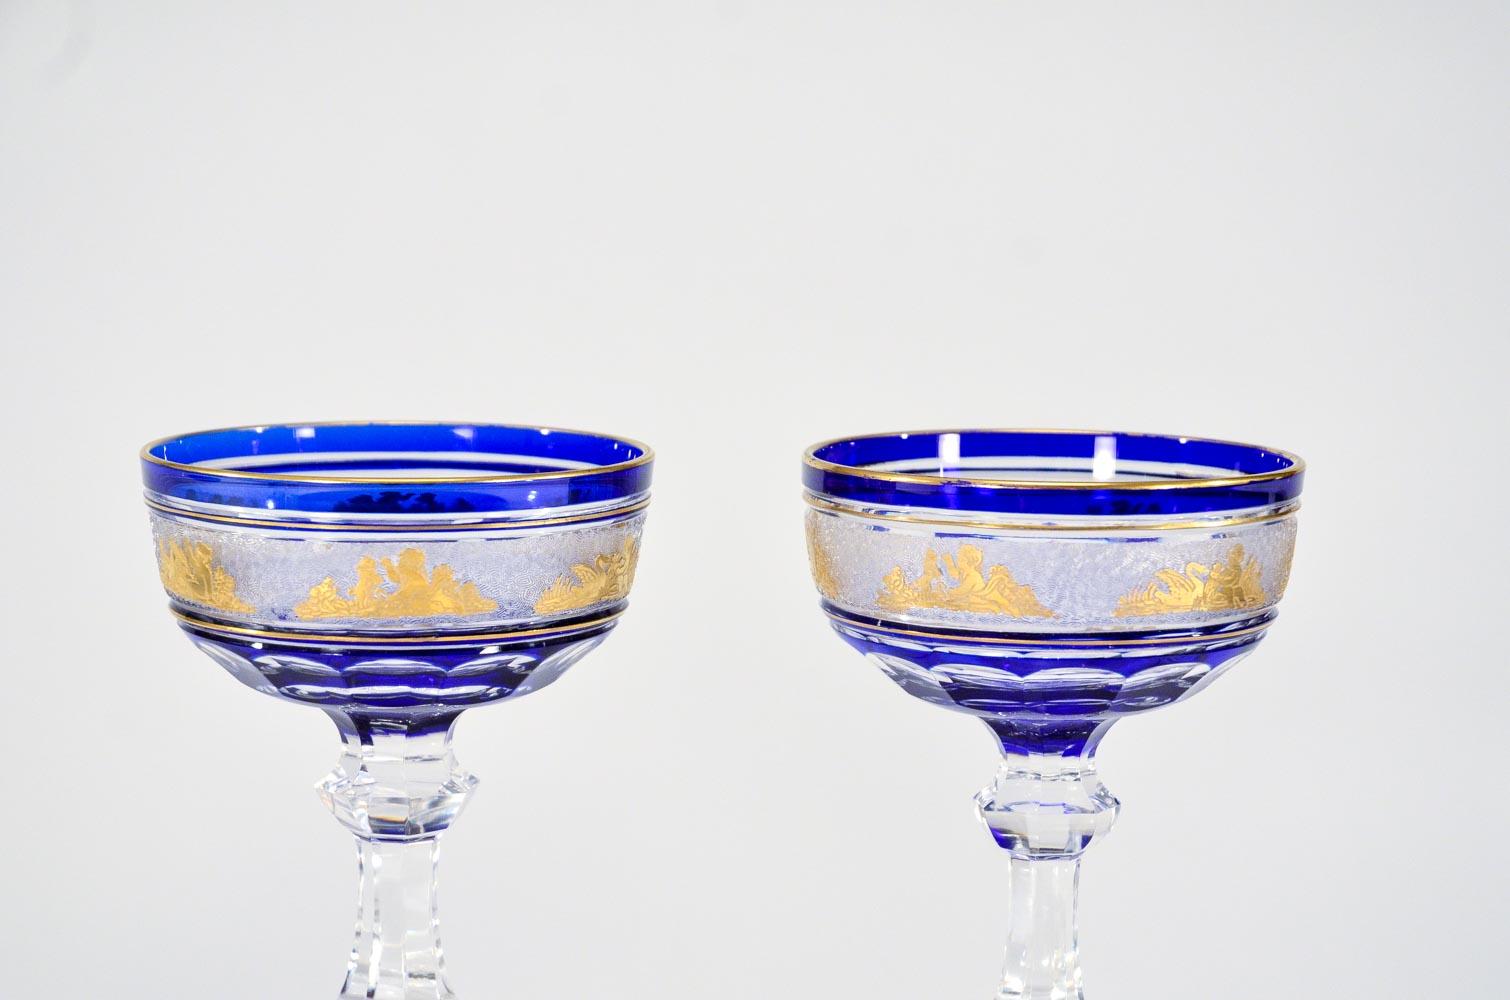 This is a magnificent set of 12 champagne coupes and/or martinis, made by Val Saint Lambert. Each one is hand blown with cobalt crystal overlay, cut to clear with cameo cut frieze of Roman figures embellished with gold leaf. This pattern is one of